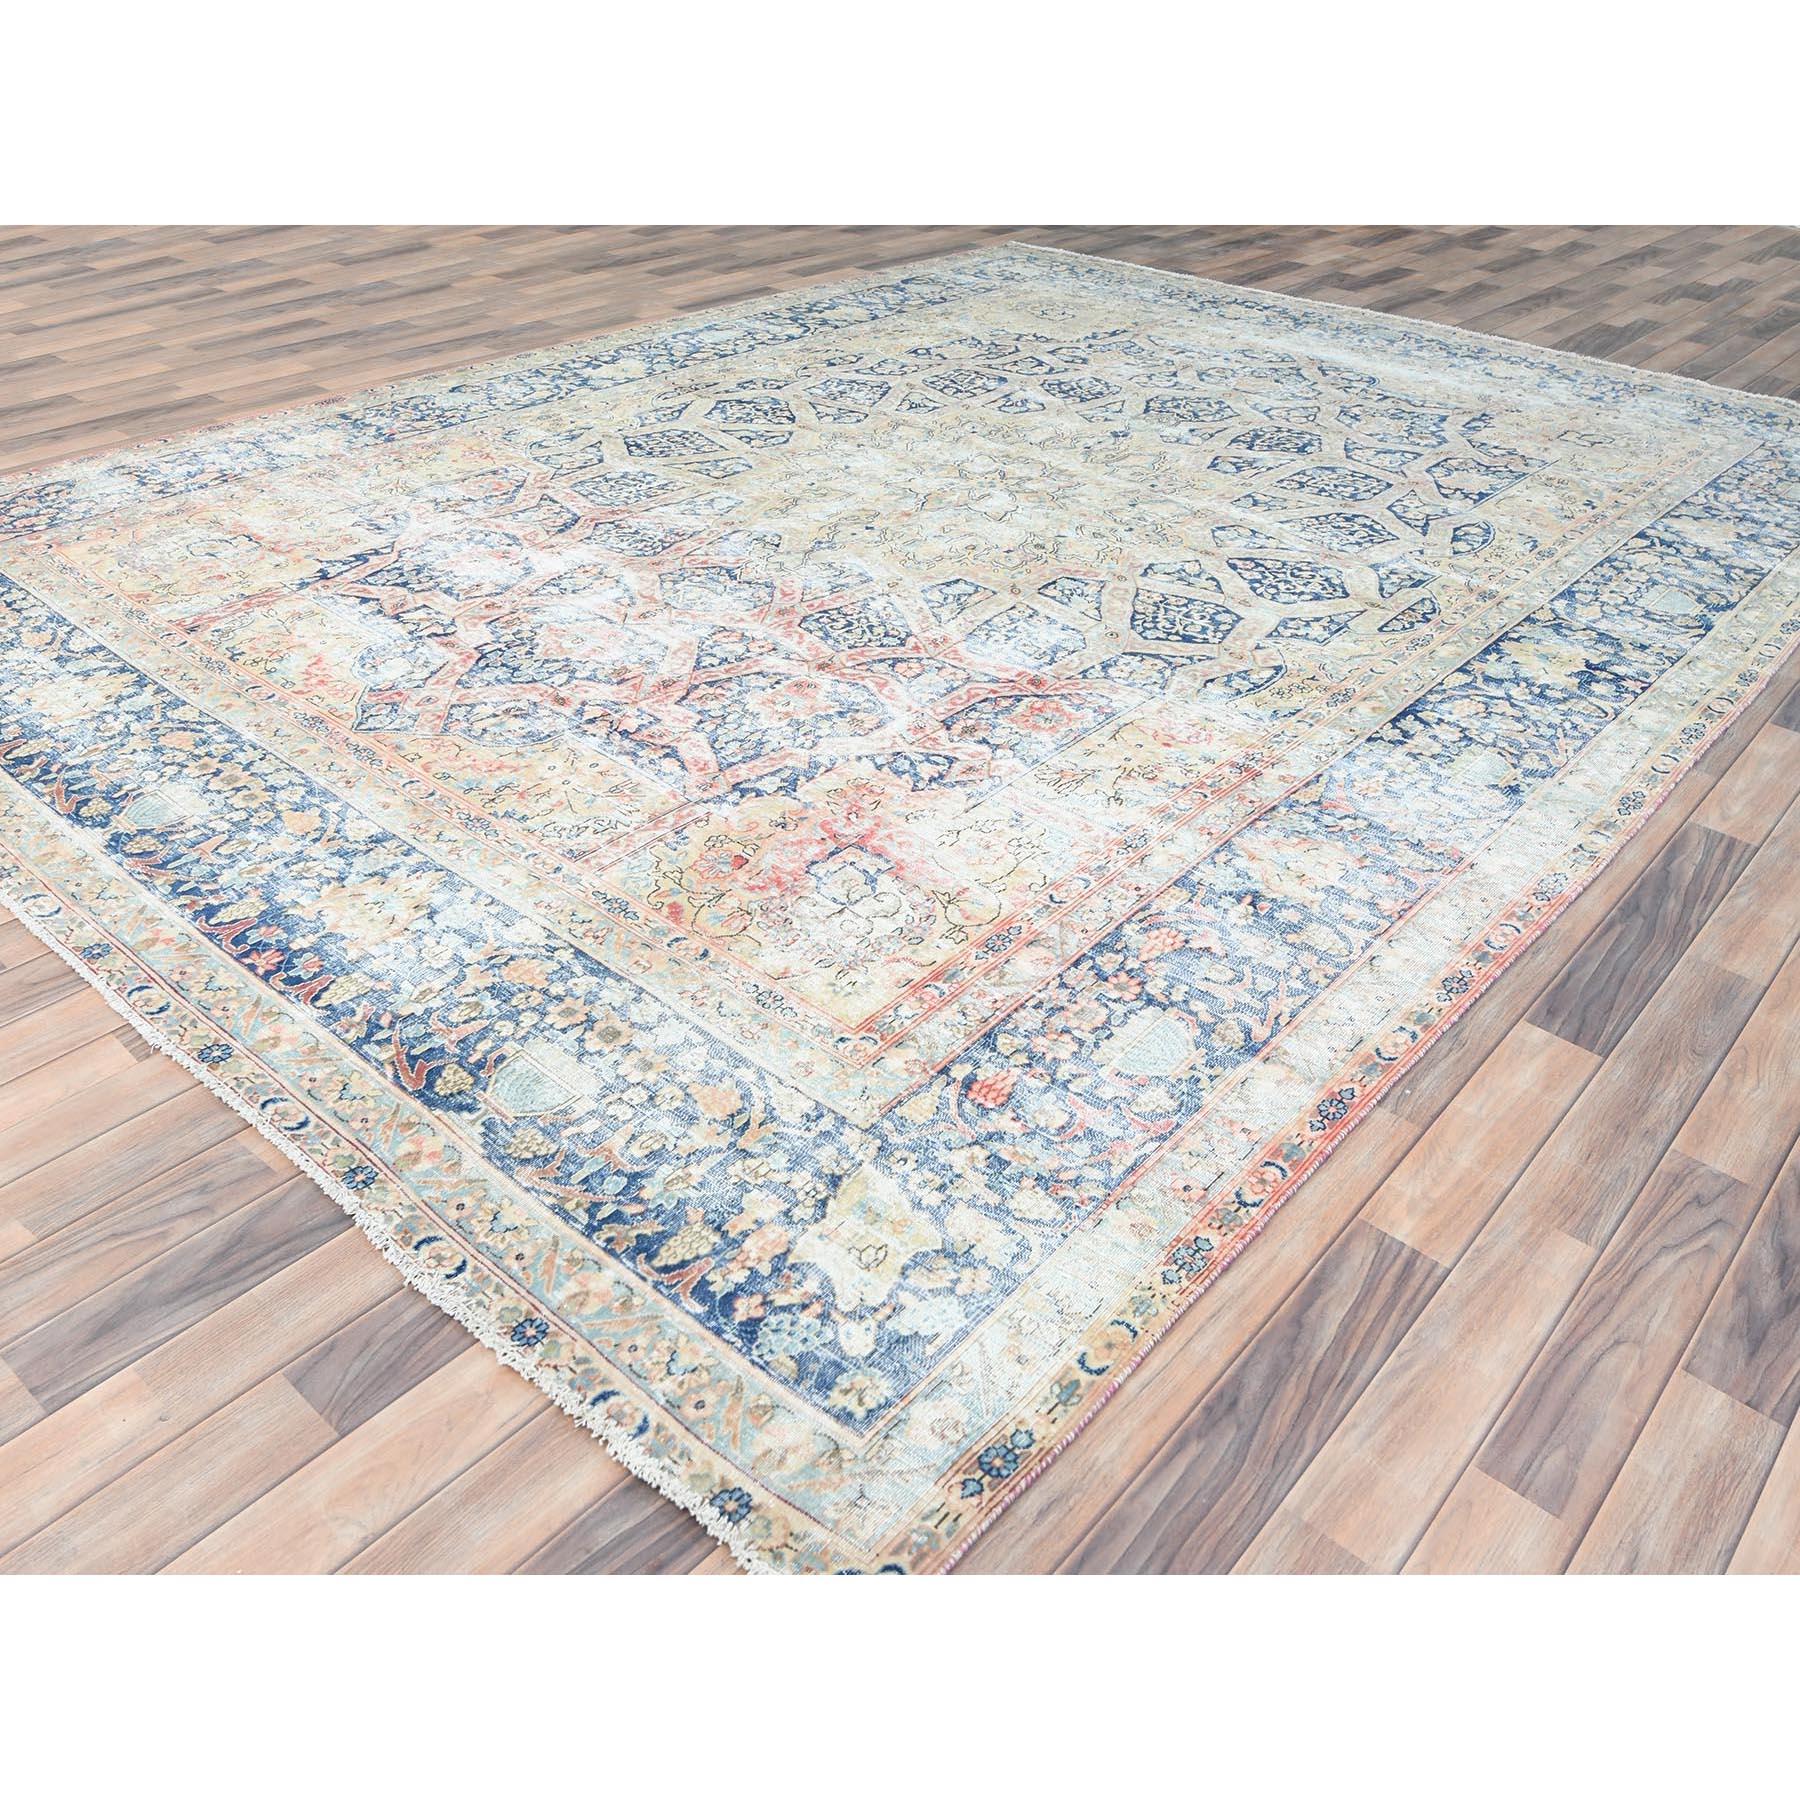 Elfenbein Vintage Persian Kerman Washed Out Hand Knotted Soft Wool Evenly Worn Rug (Persisch) im Angebot